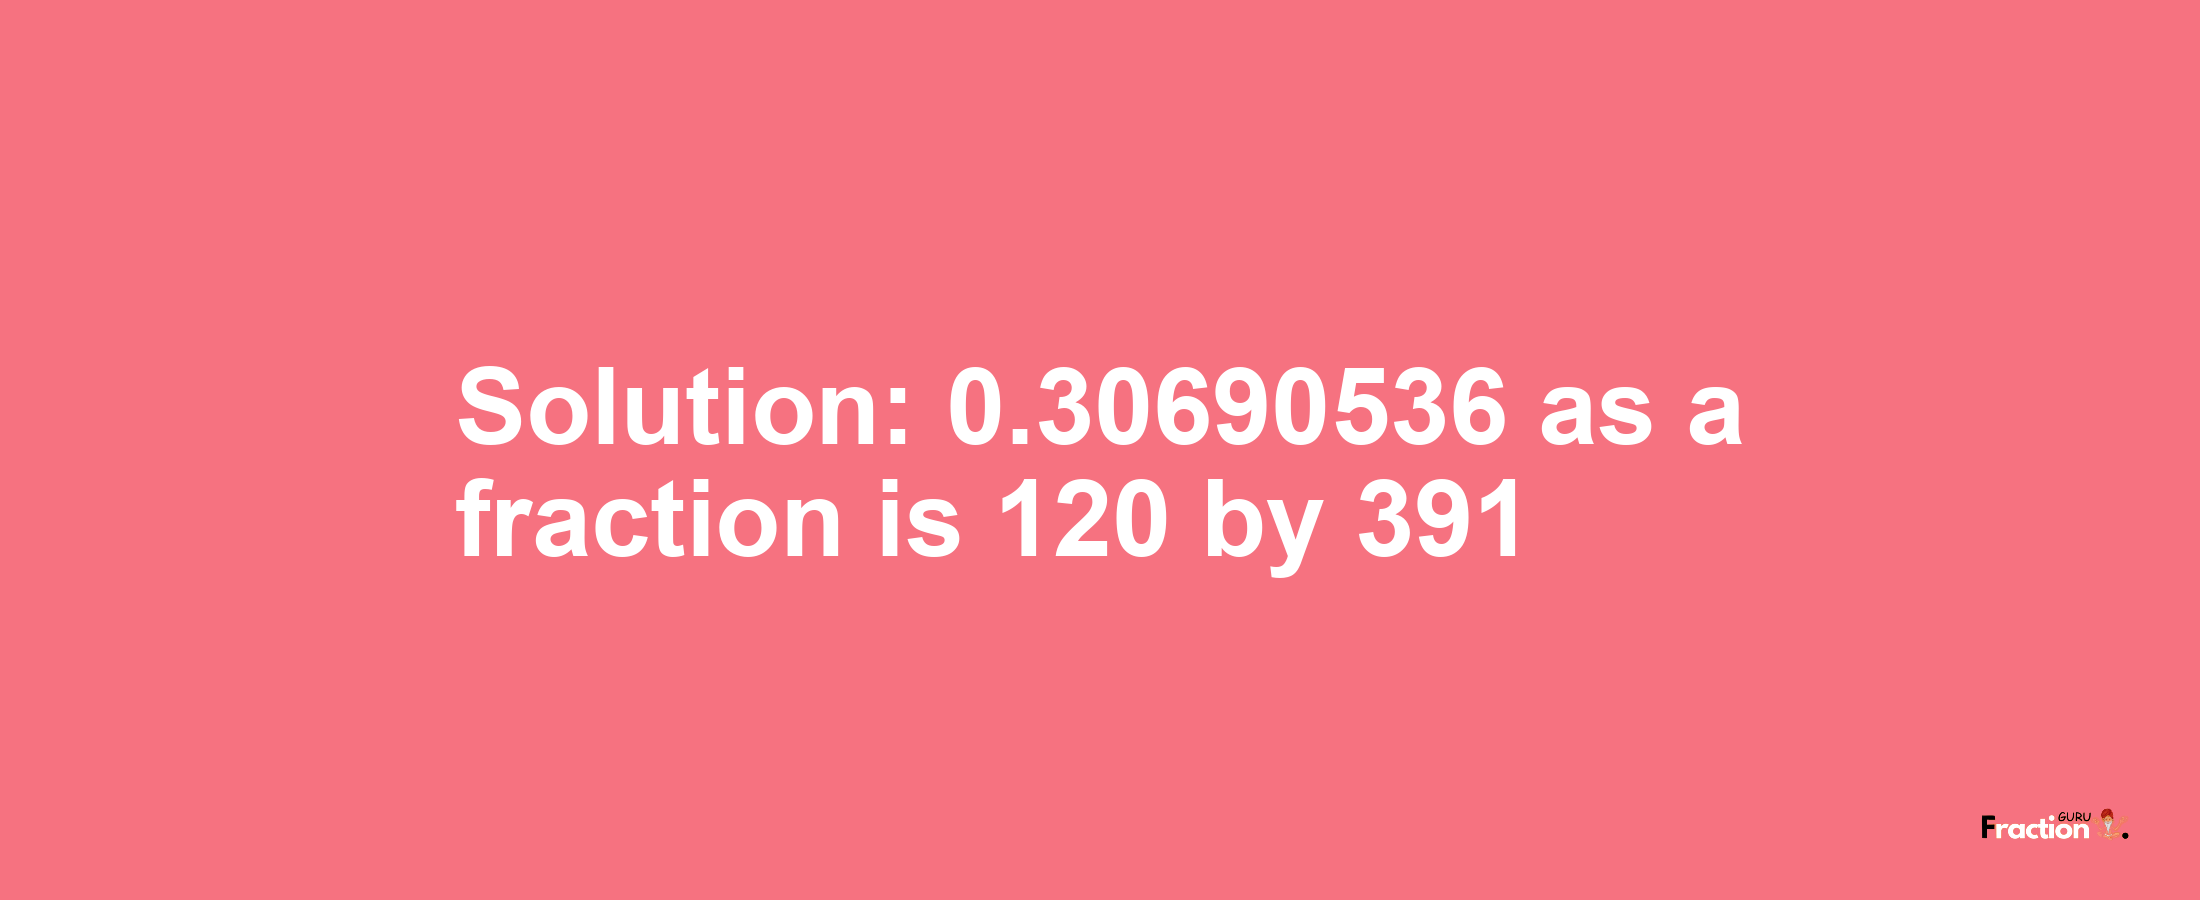 Solution:0.30690536 as a fraction is 120/391